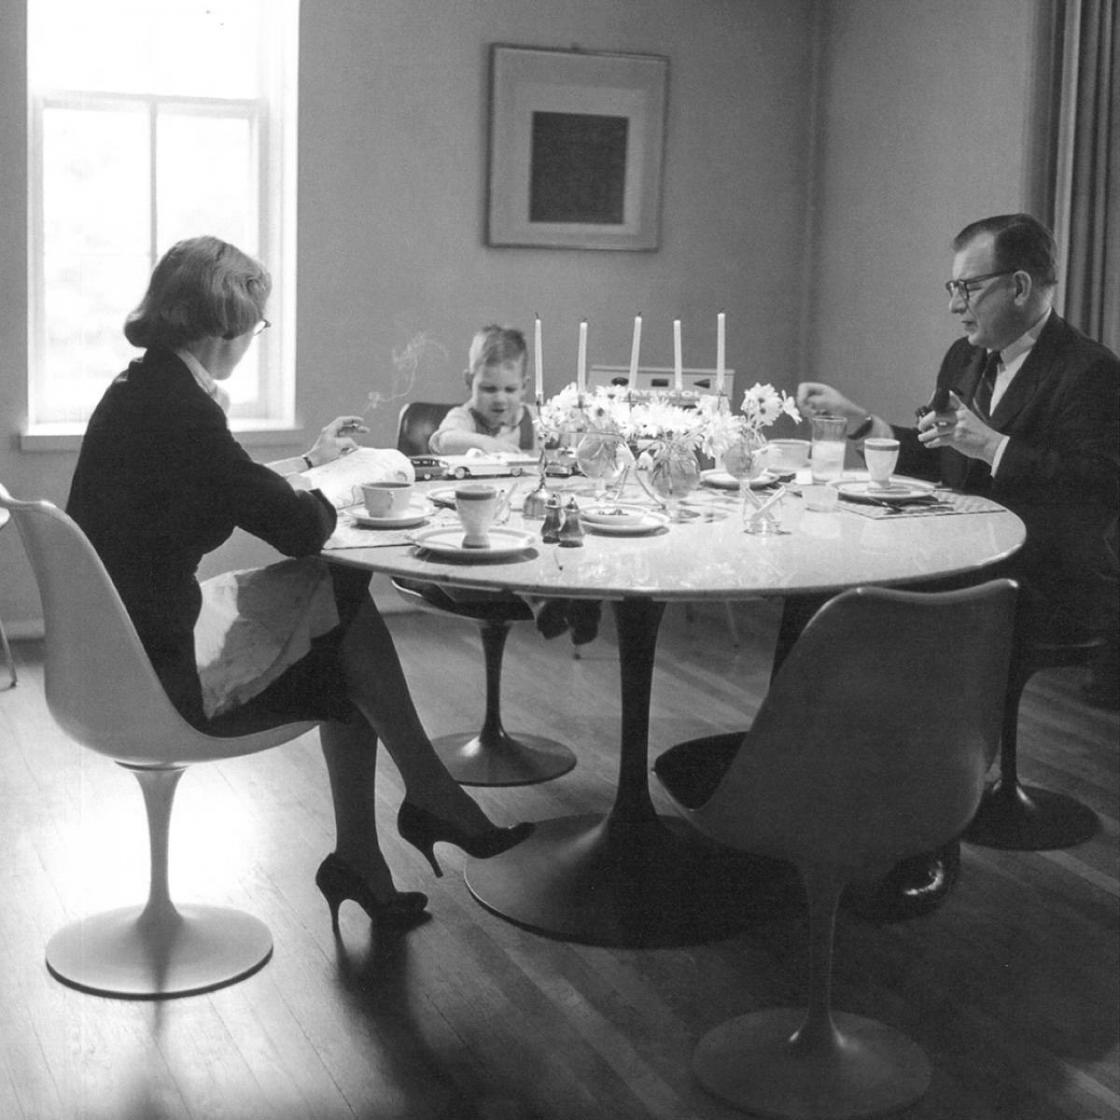 Photograph of Aline and Eero at dining table